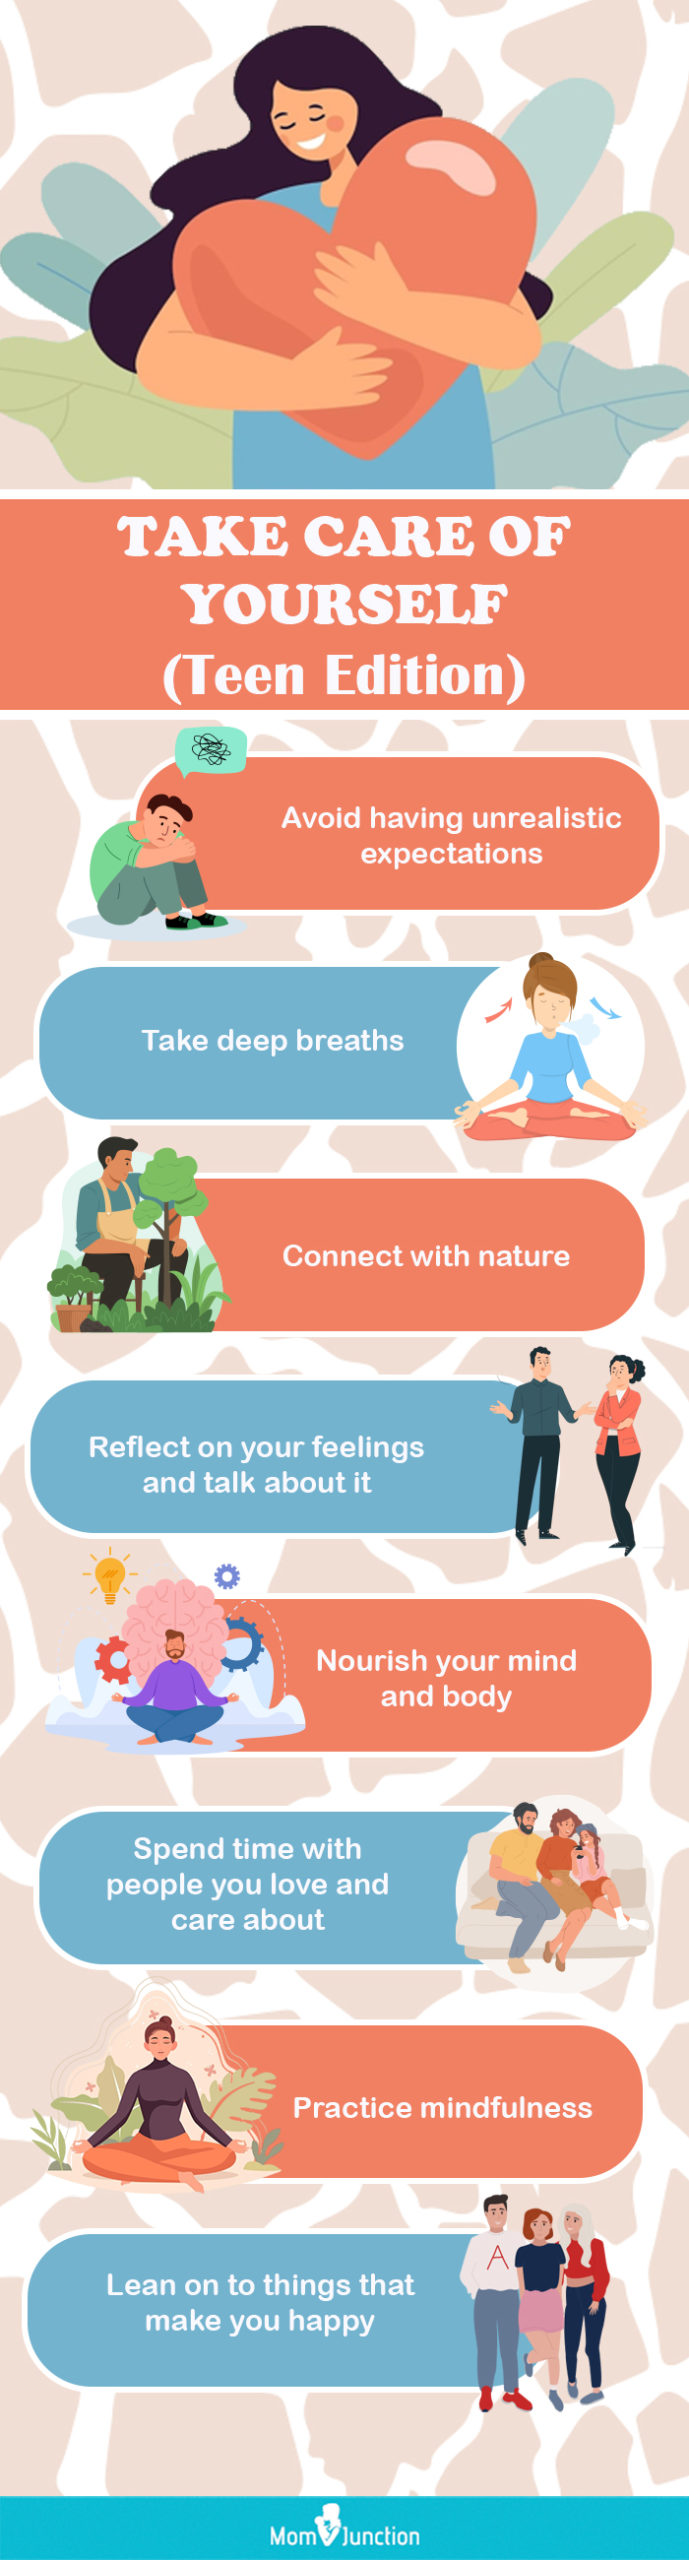 25 Self-Care Tips For Better Health - How To Take Care Of Yourself